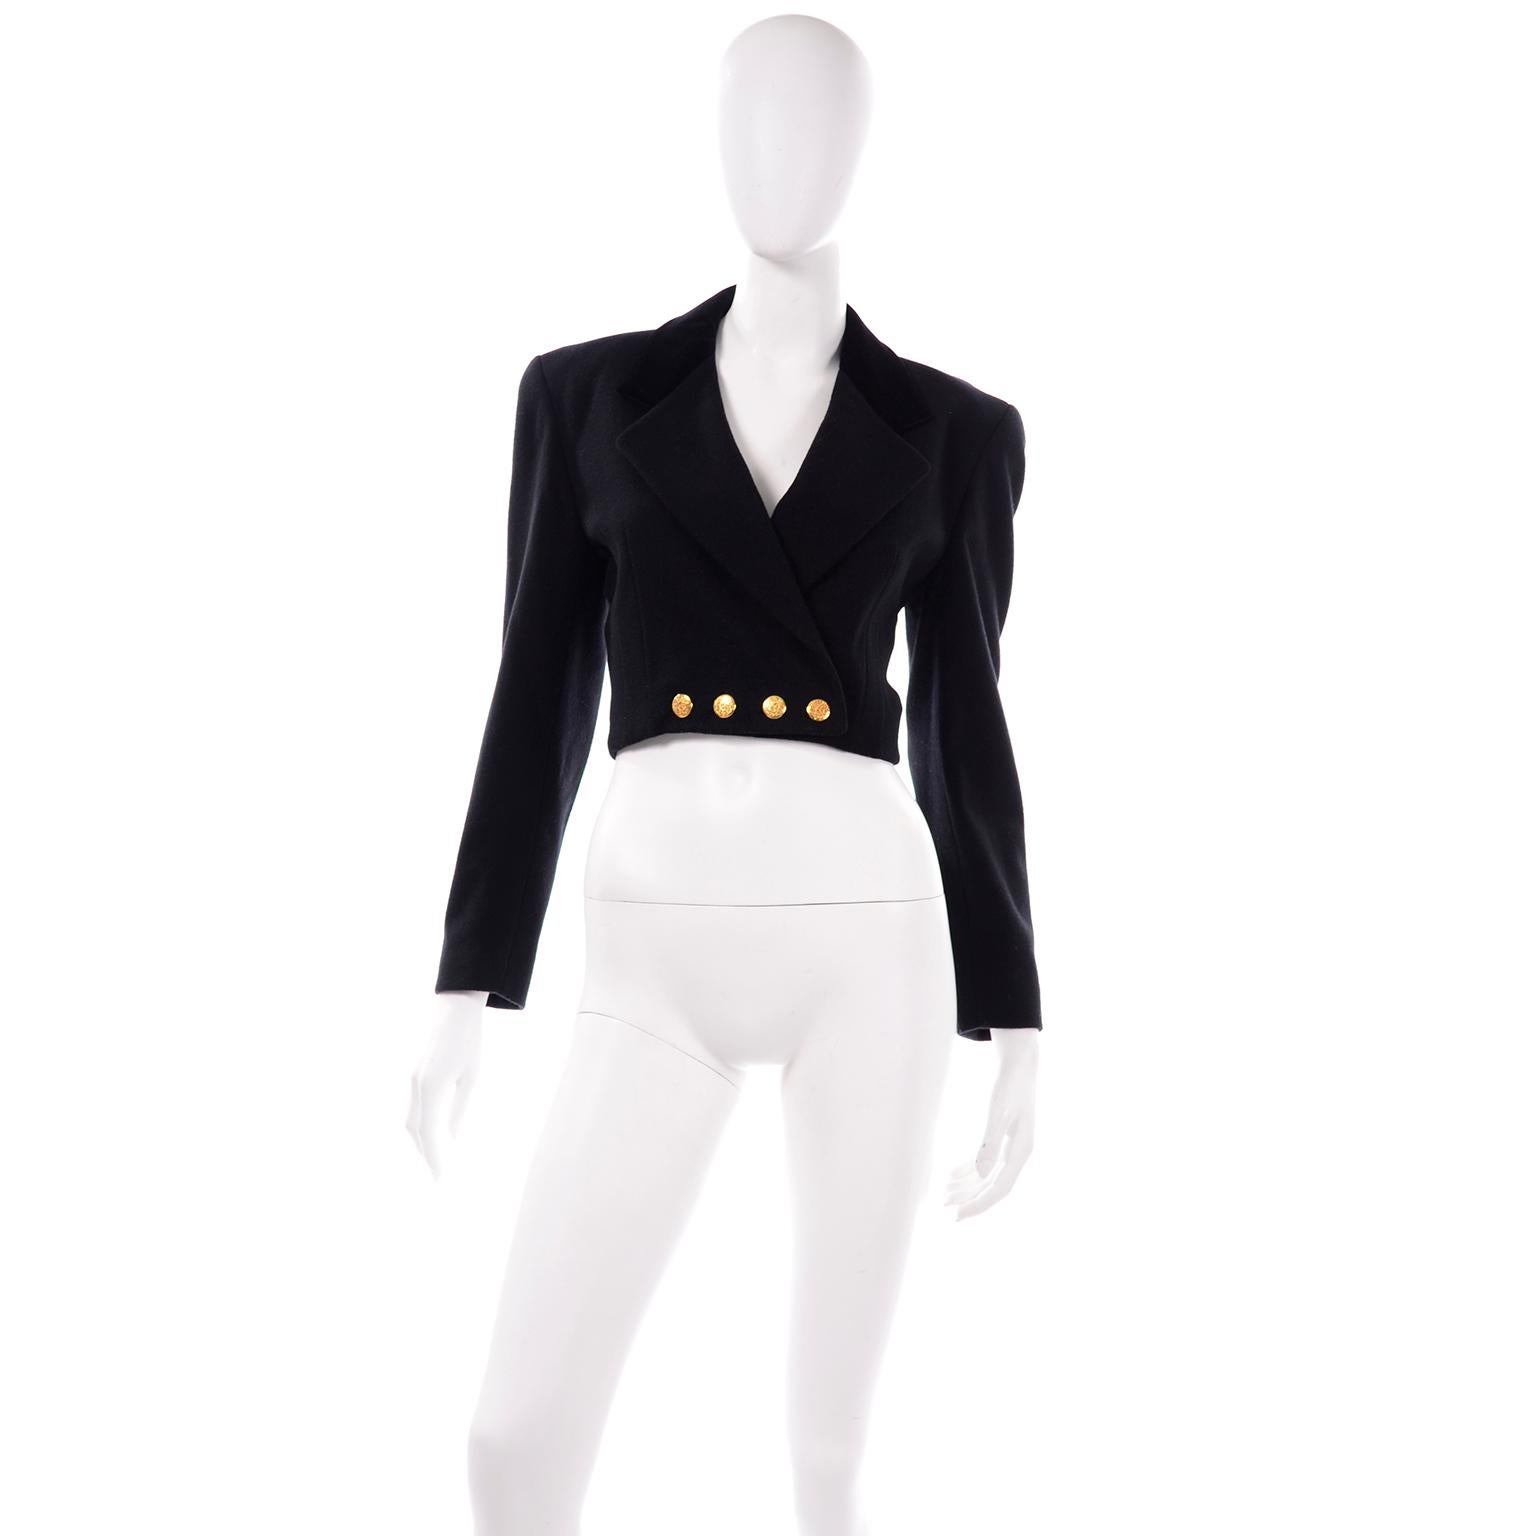 This is a great vintage Wool & Cashmere blend Escada cropped blazer designed by Margaretha Ley in the 1980's. Escada vintage jackets are some of the nicest we've ever come across and the materials they used were nothing but the best. This jacket has